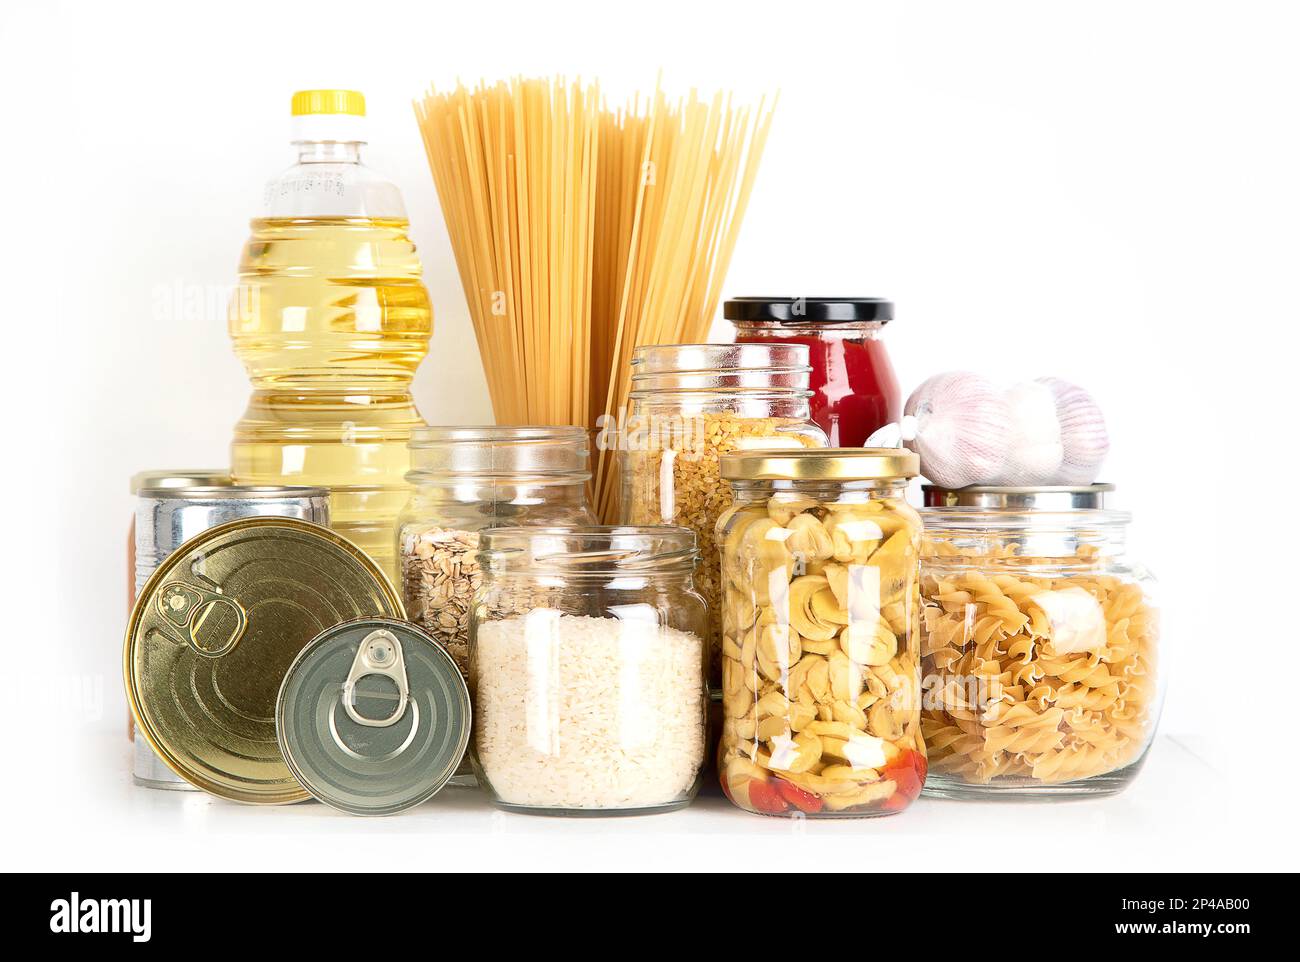 Food supplies. Crisis food stock. Different glass jars with grains, pasta, oil, nut, canned food Stock Photo